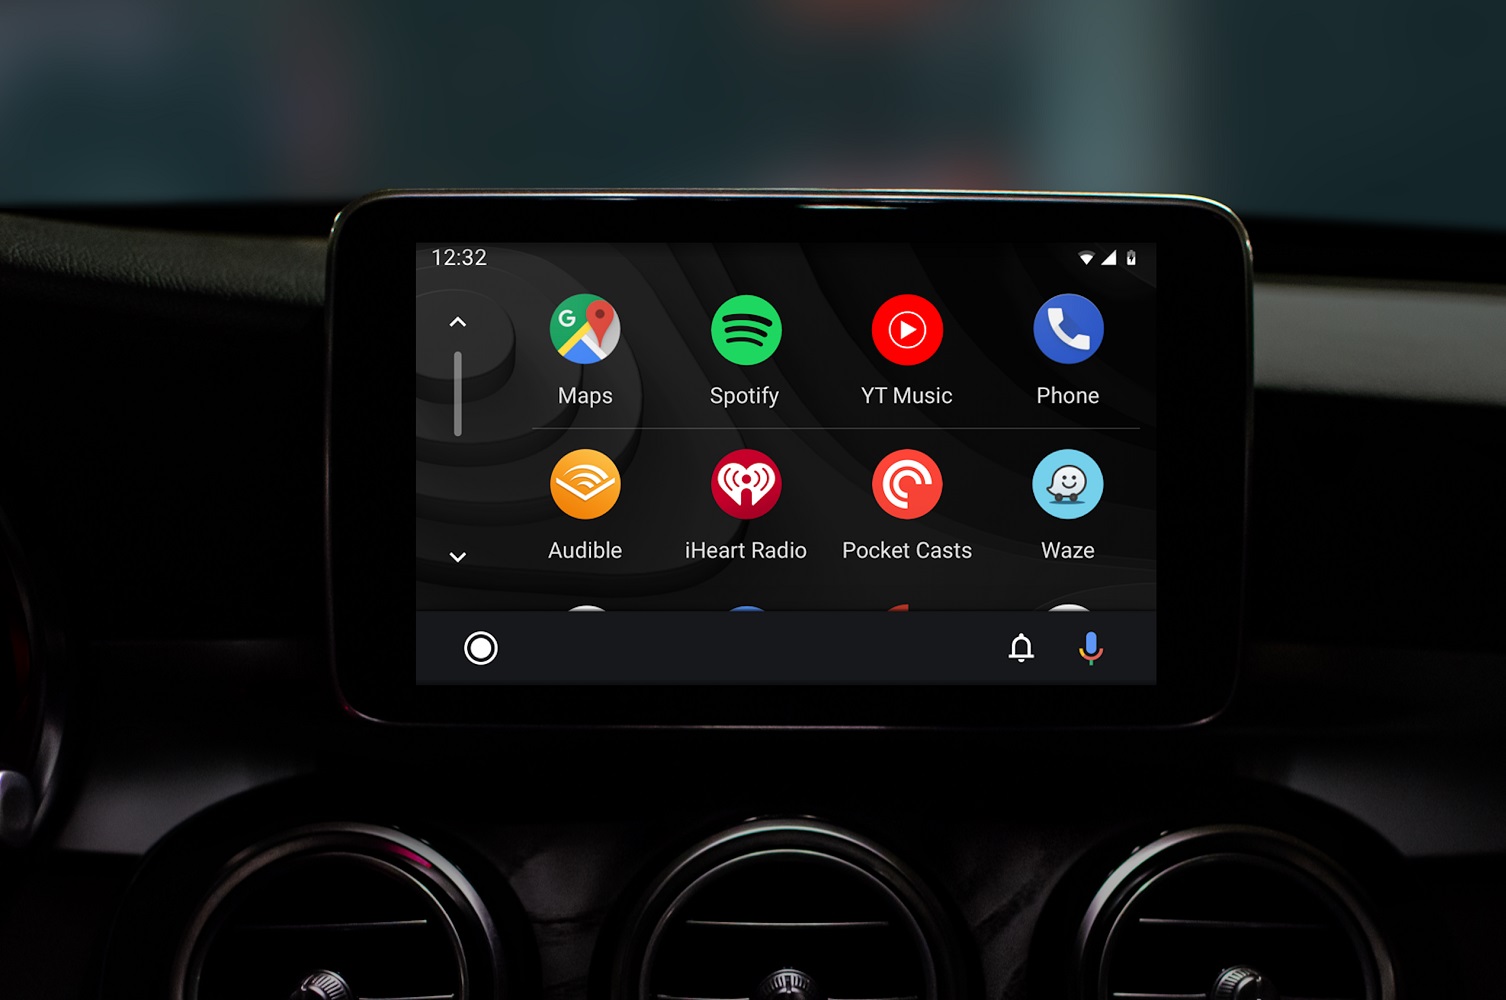 https://www.digitaltrends.com/wp-content/uploads/2019/05/android-auto-update-1.jpg?fit=1506%2C1000&p=1